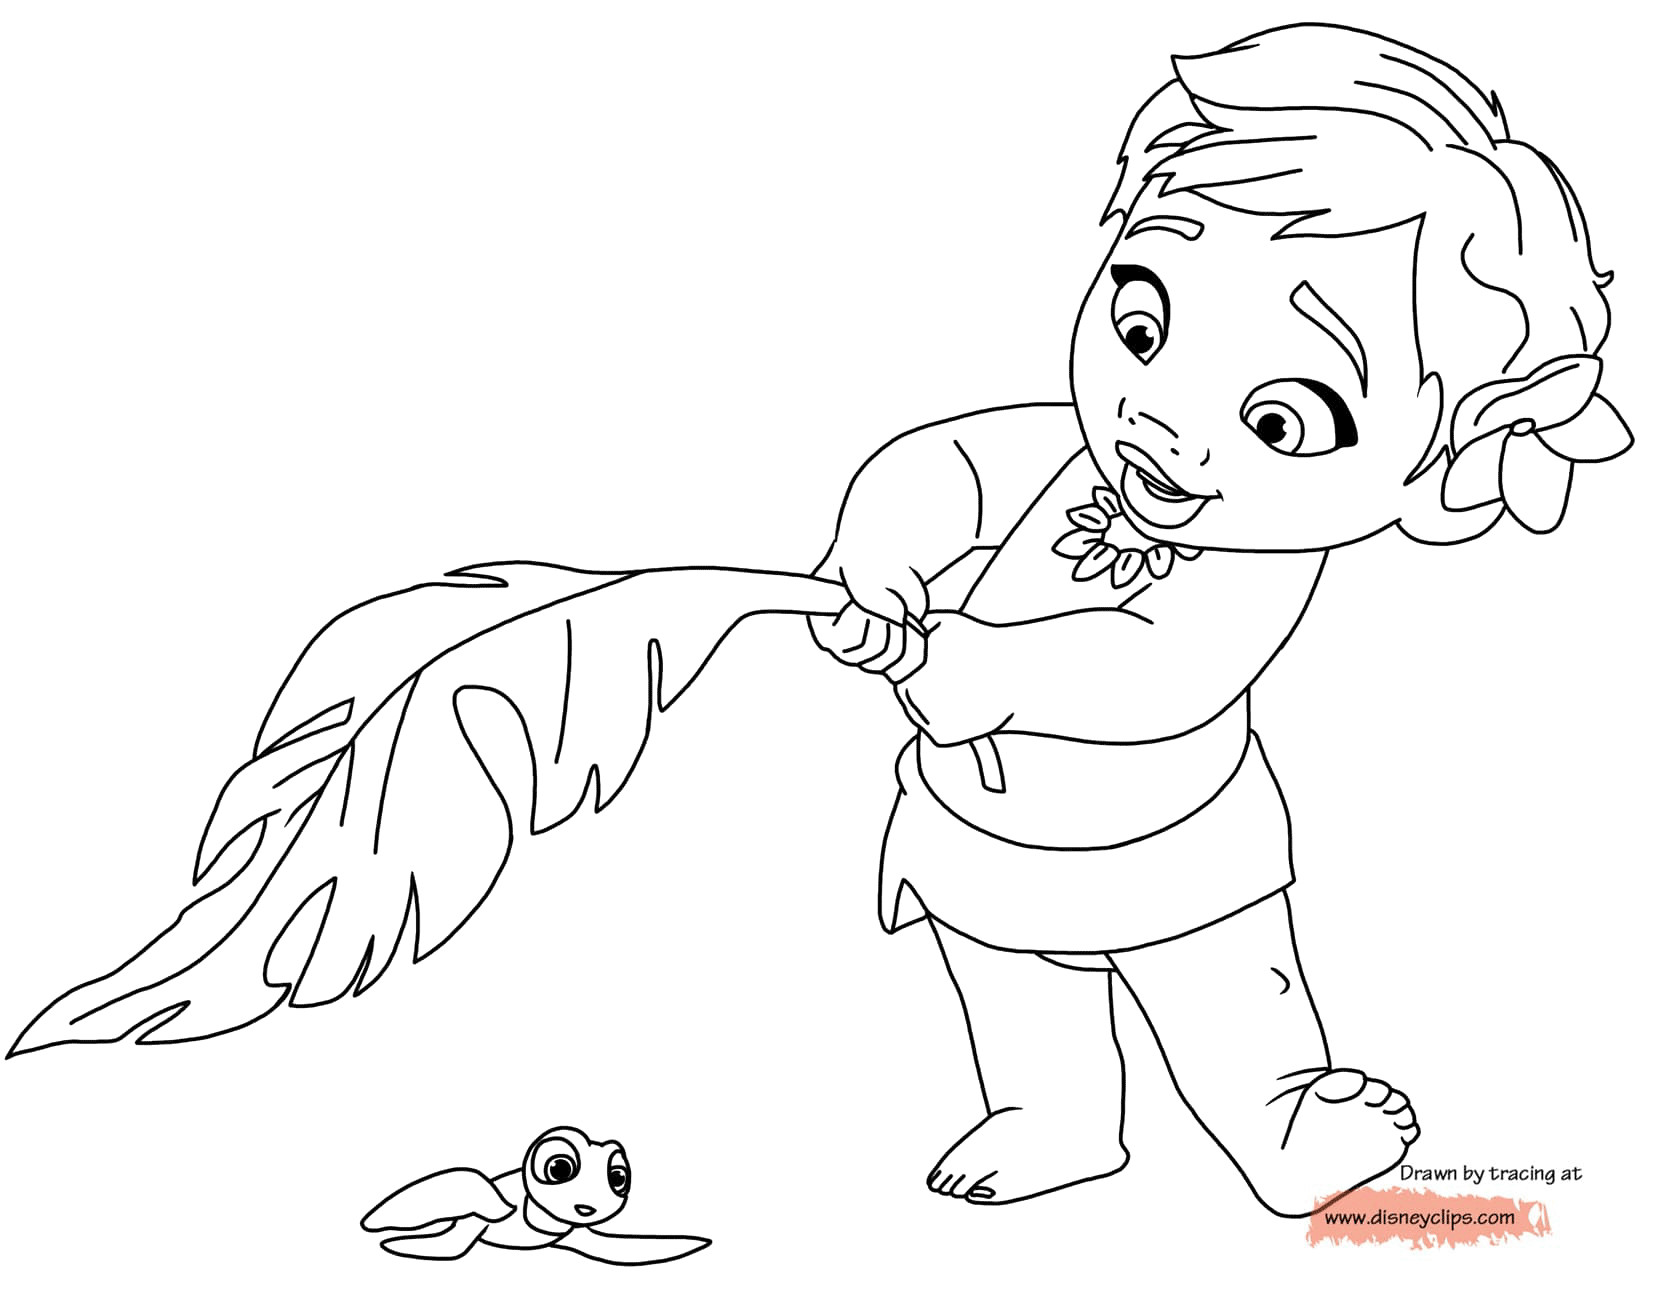 Coloring Pages For Kids Moana
 Disney s Moana Coloring Pages